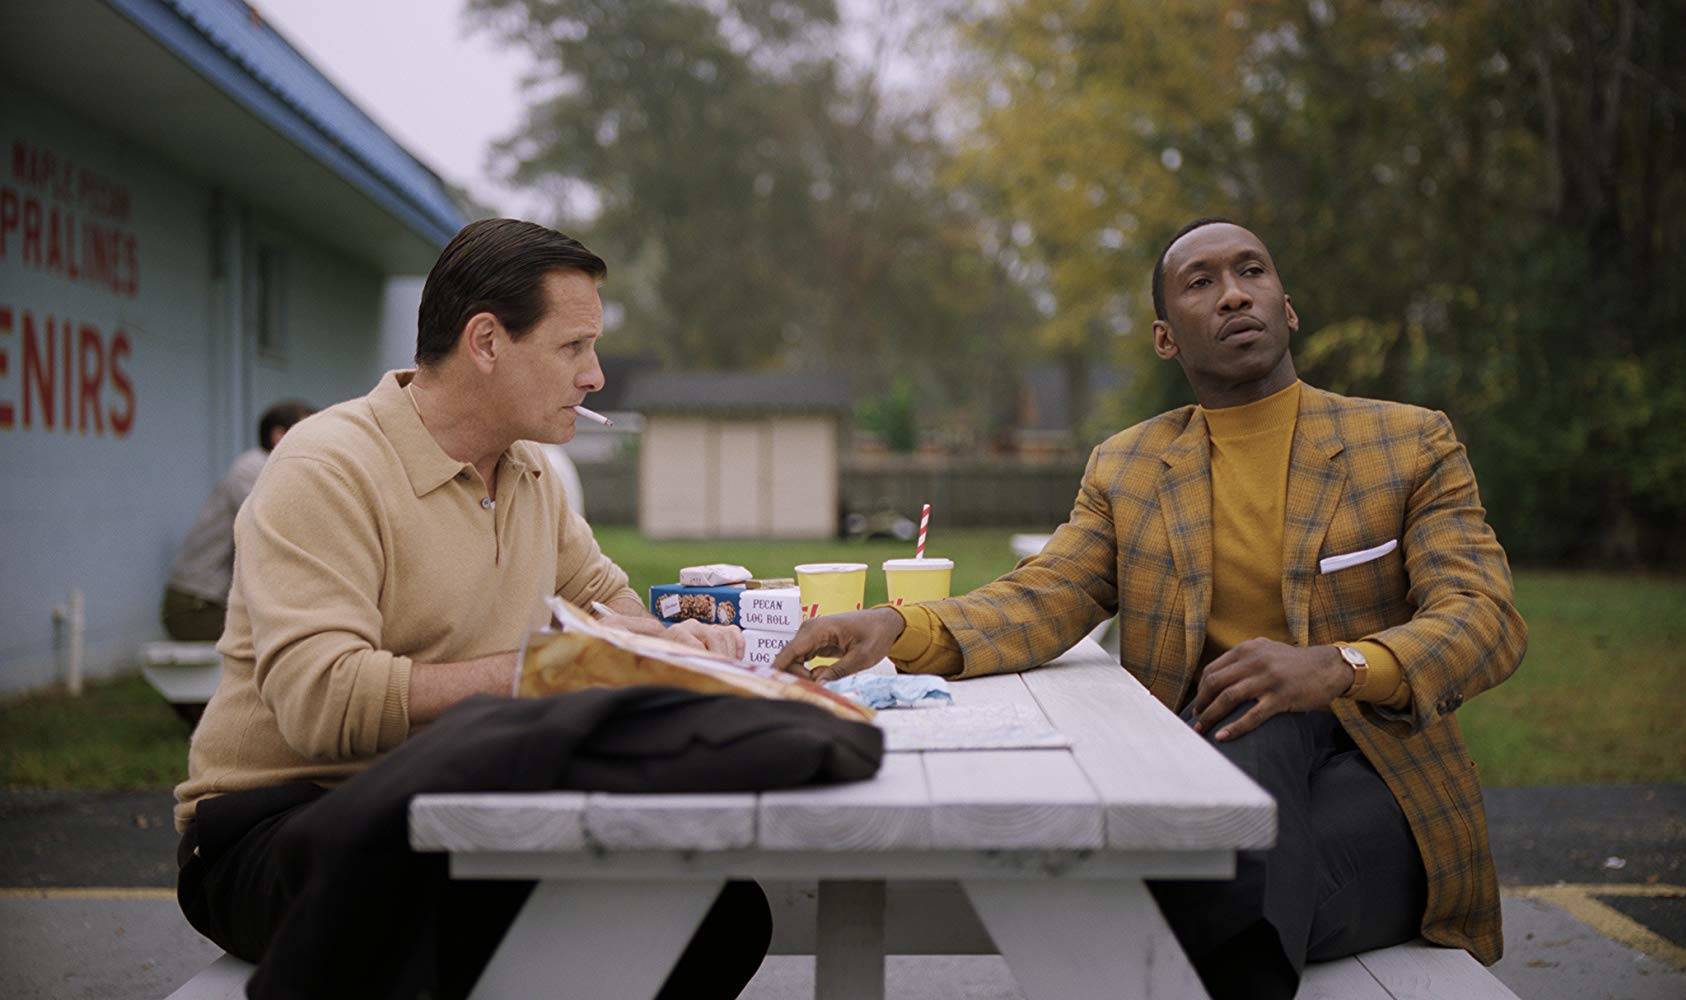 Now Playing: ‘Green Book’ tells a moving story about looking past bias